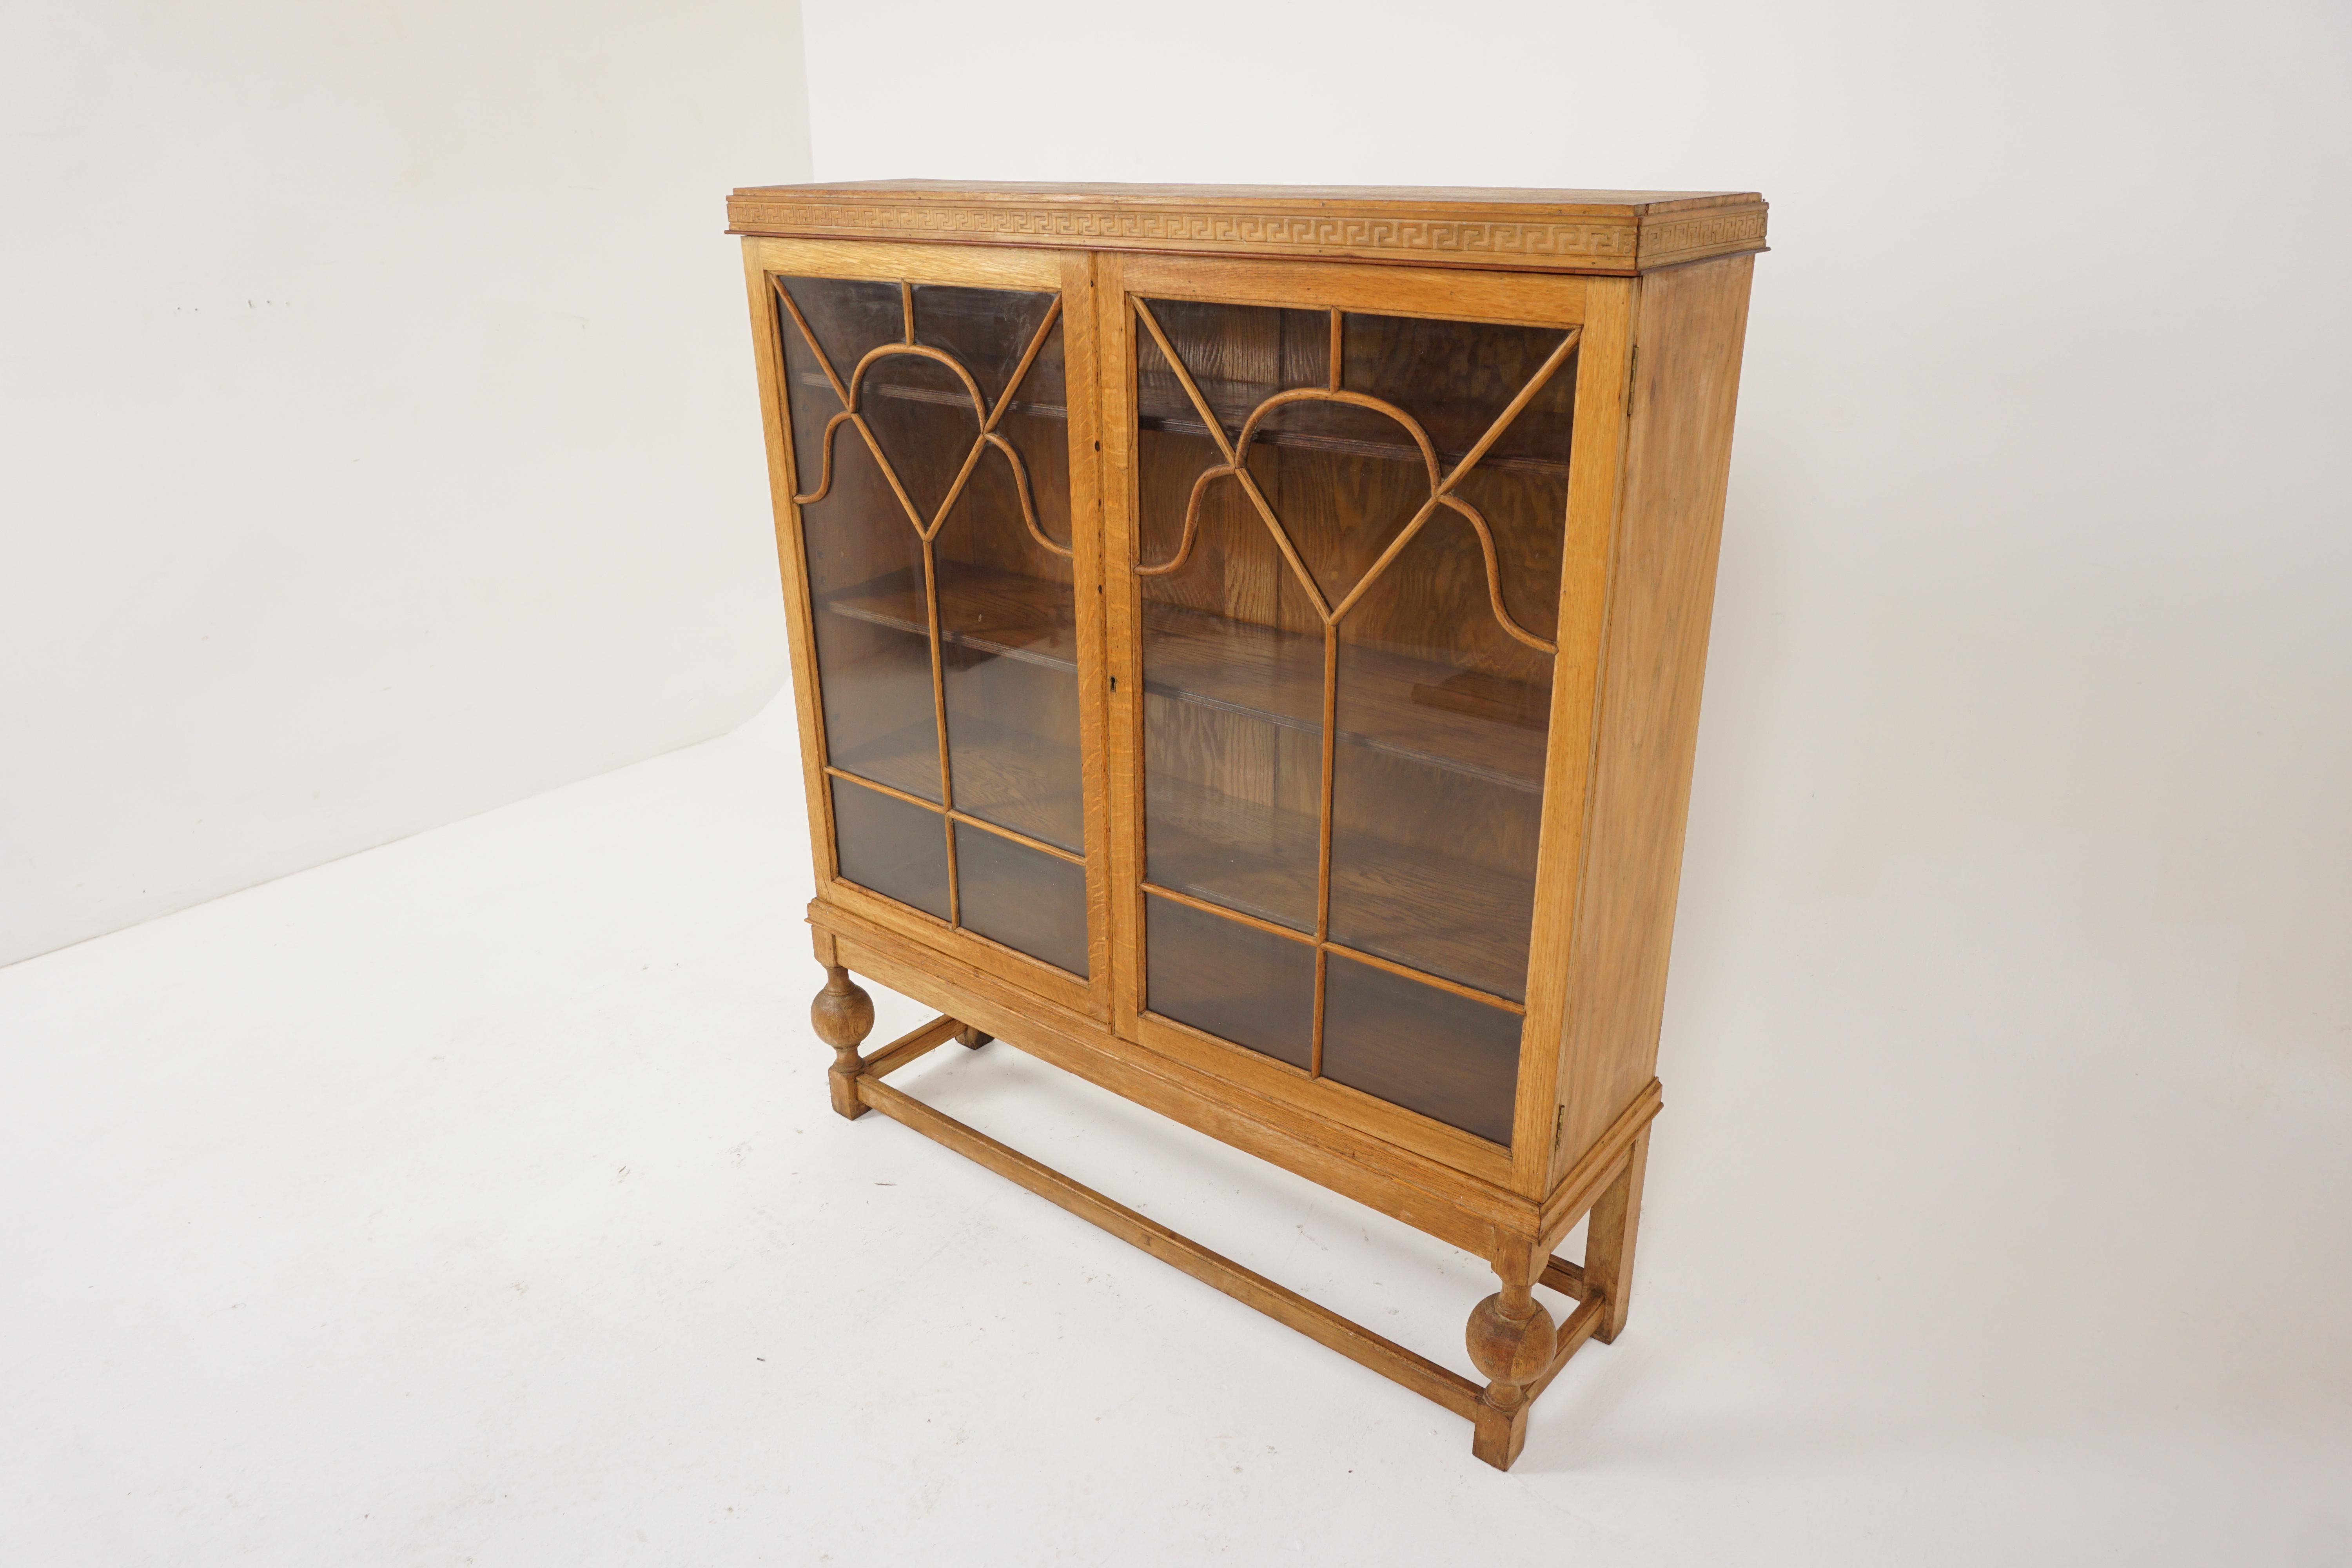 Antique display cabinet, golden tiger oak, bookcase, Scotland 1920, B2605

Scotland 1920
Solid oak 
Original finish
Rectangular top
Pair of original glass doors 
With moulding to the front
Fitted with three adjustable wooden